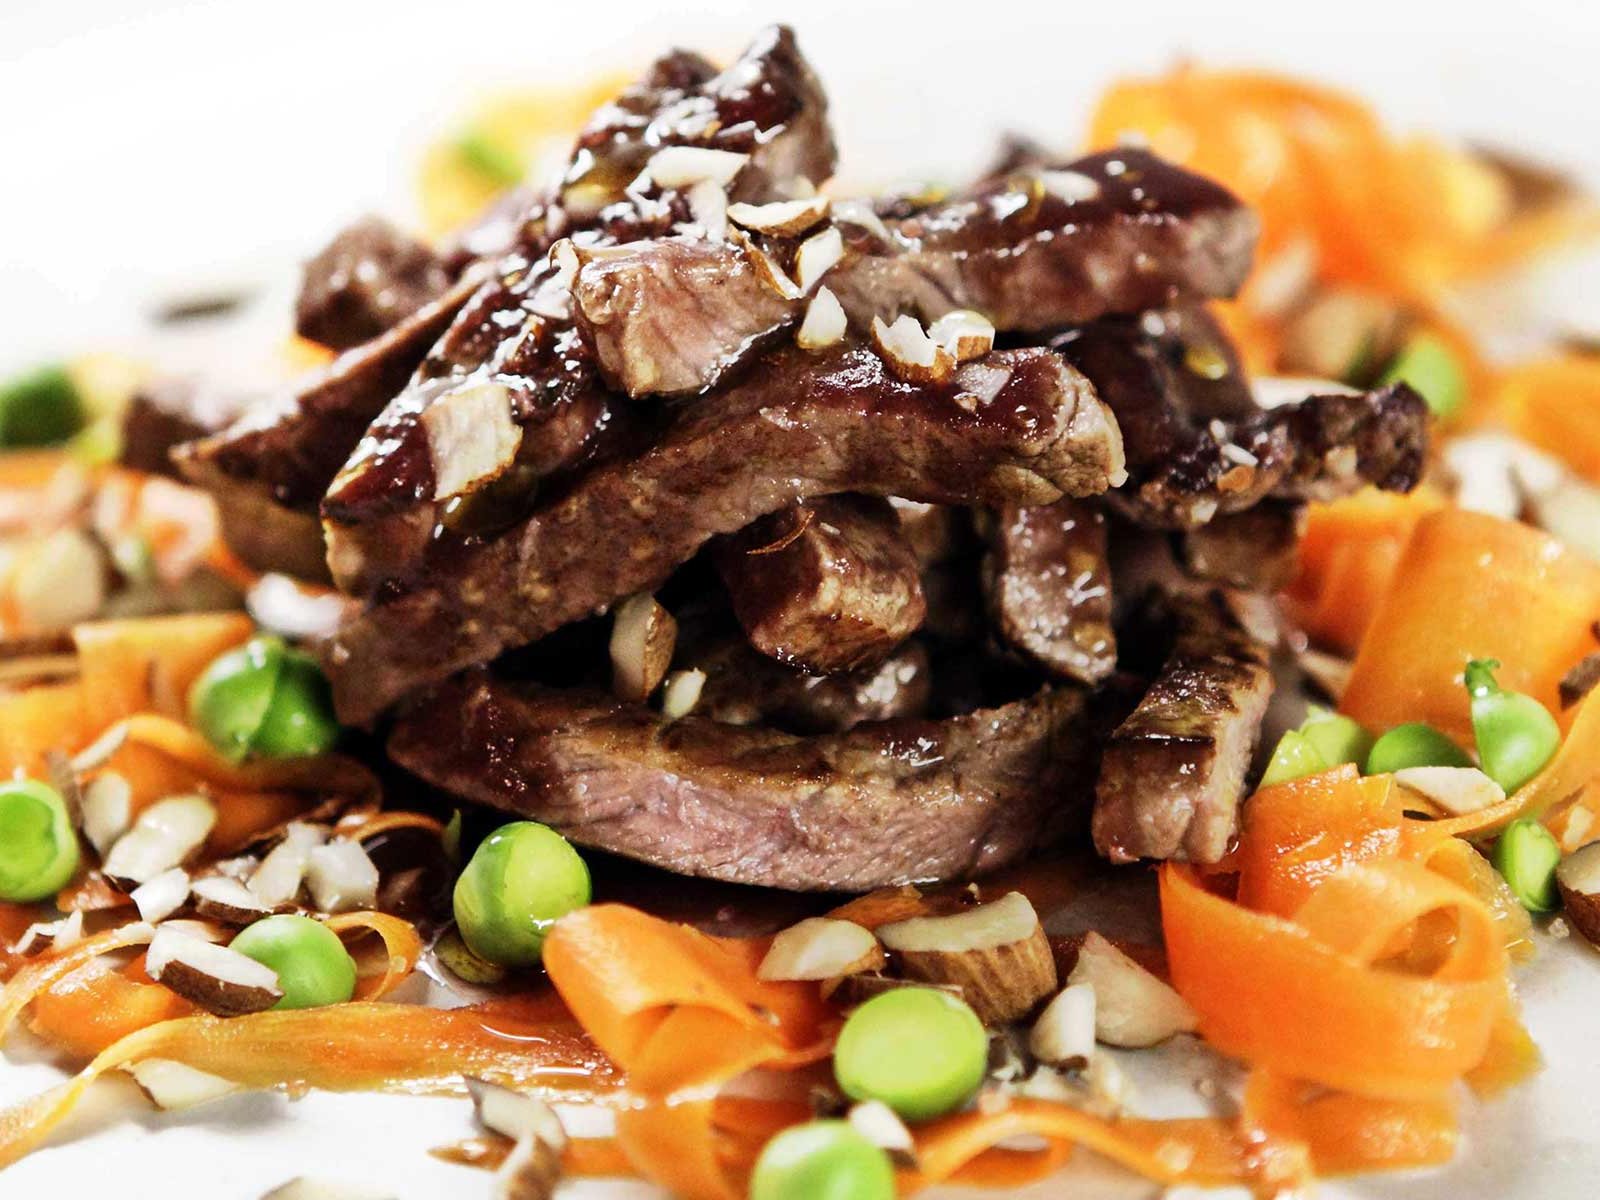 Carrot and Almond Salad with Beef